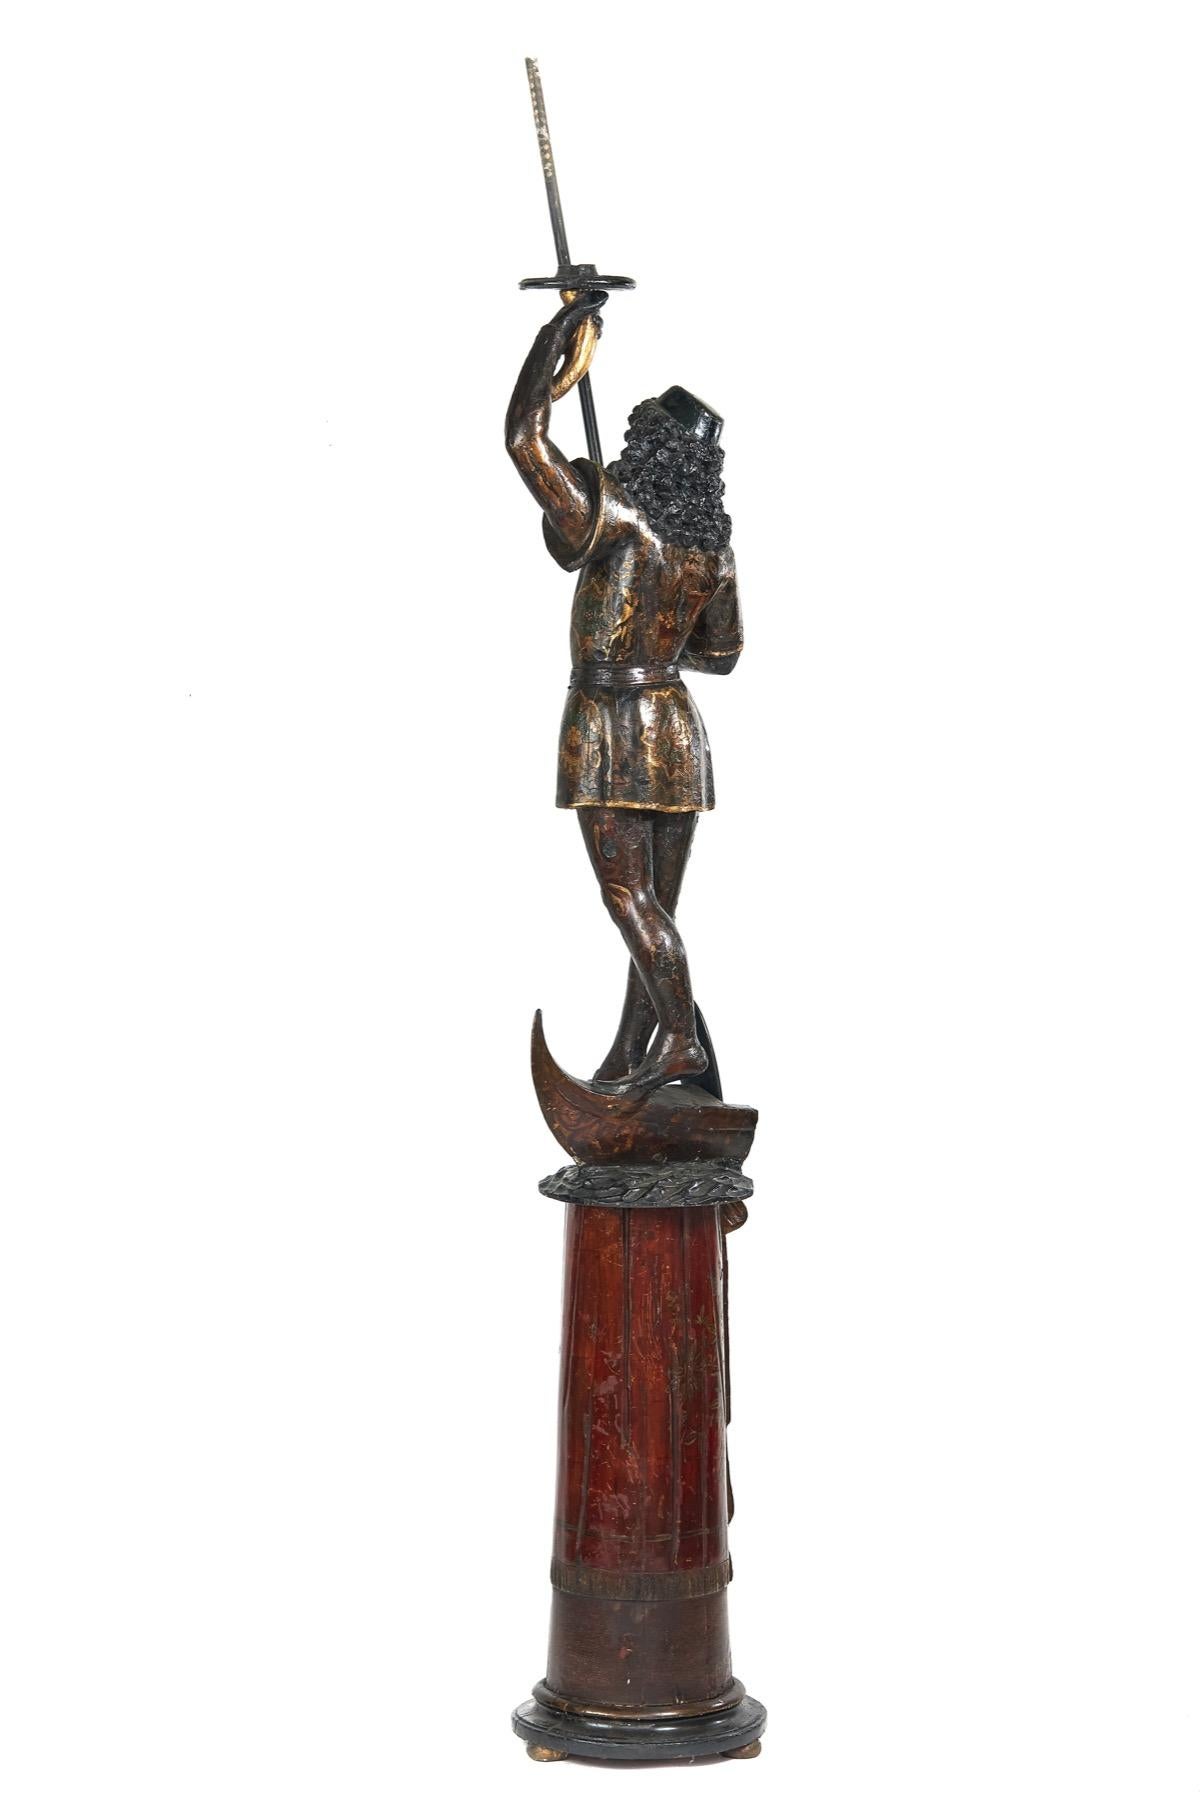 C 19th Venetian Carved Gondolier Figure Candlestand,
With Polychrome Decoration
Gondolier, Holding a paddle & Cornucopia shaped holder for Candle.
Standing on part gondola
The Separate Tapering Cylinder Column on 3 Bun Feet,
Pine with